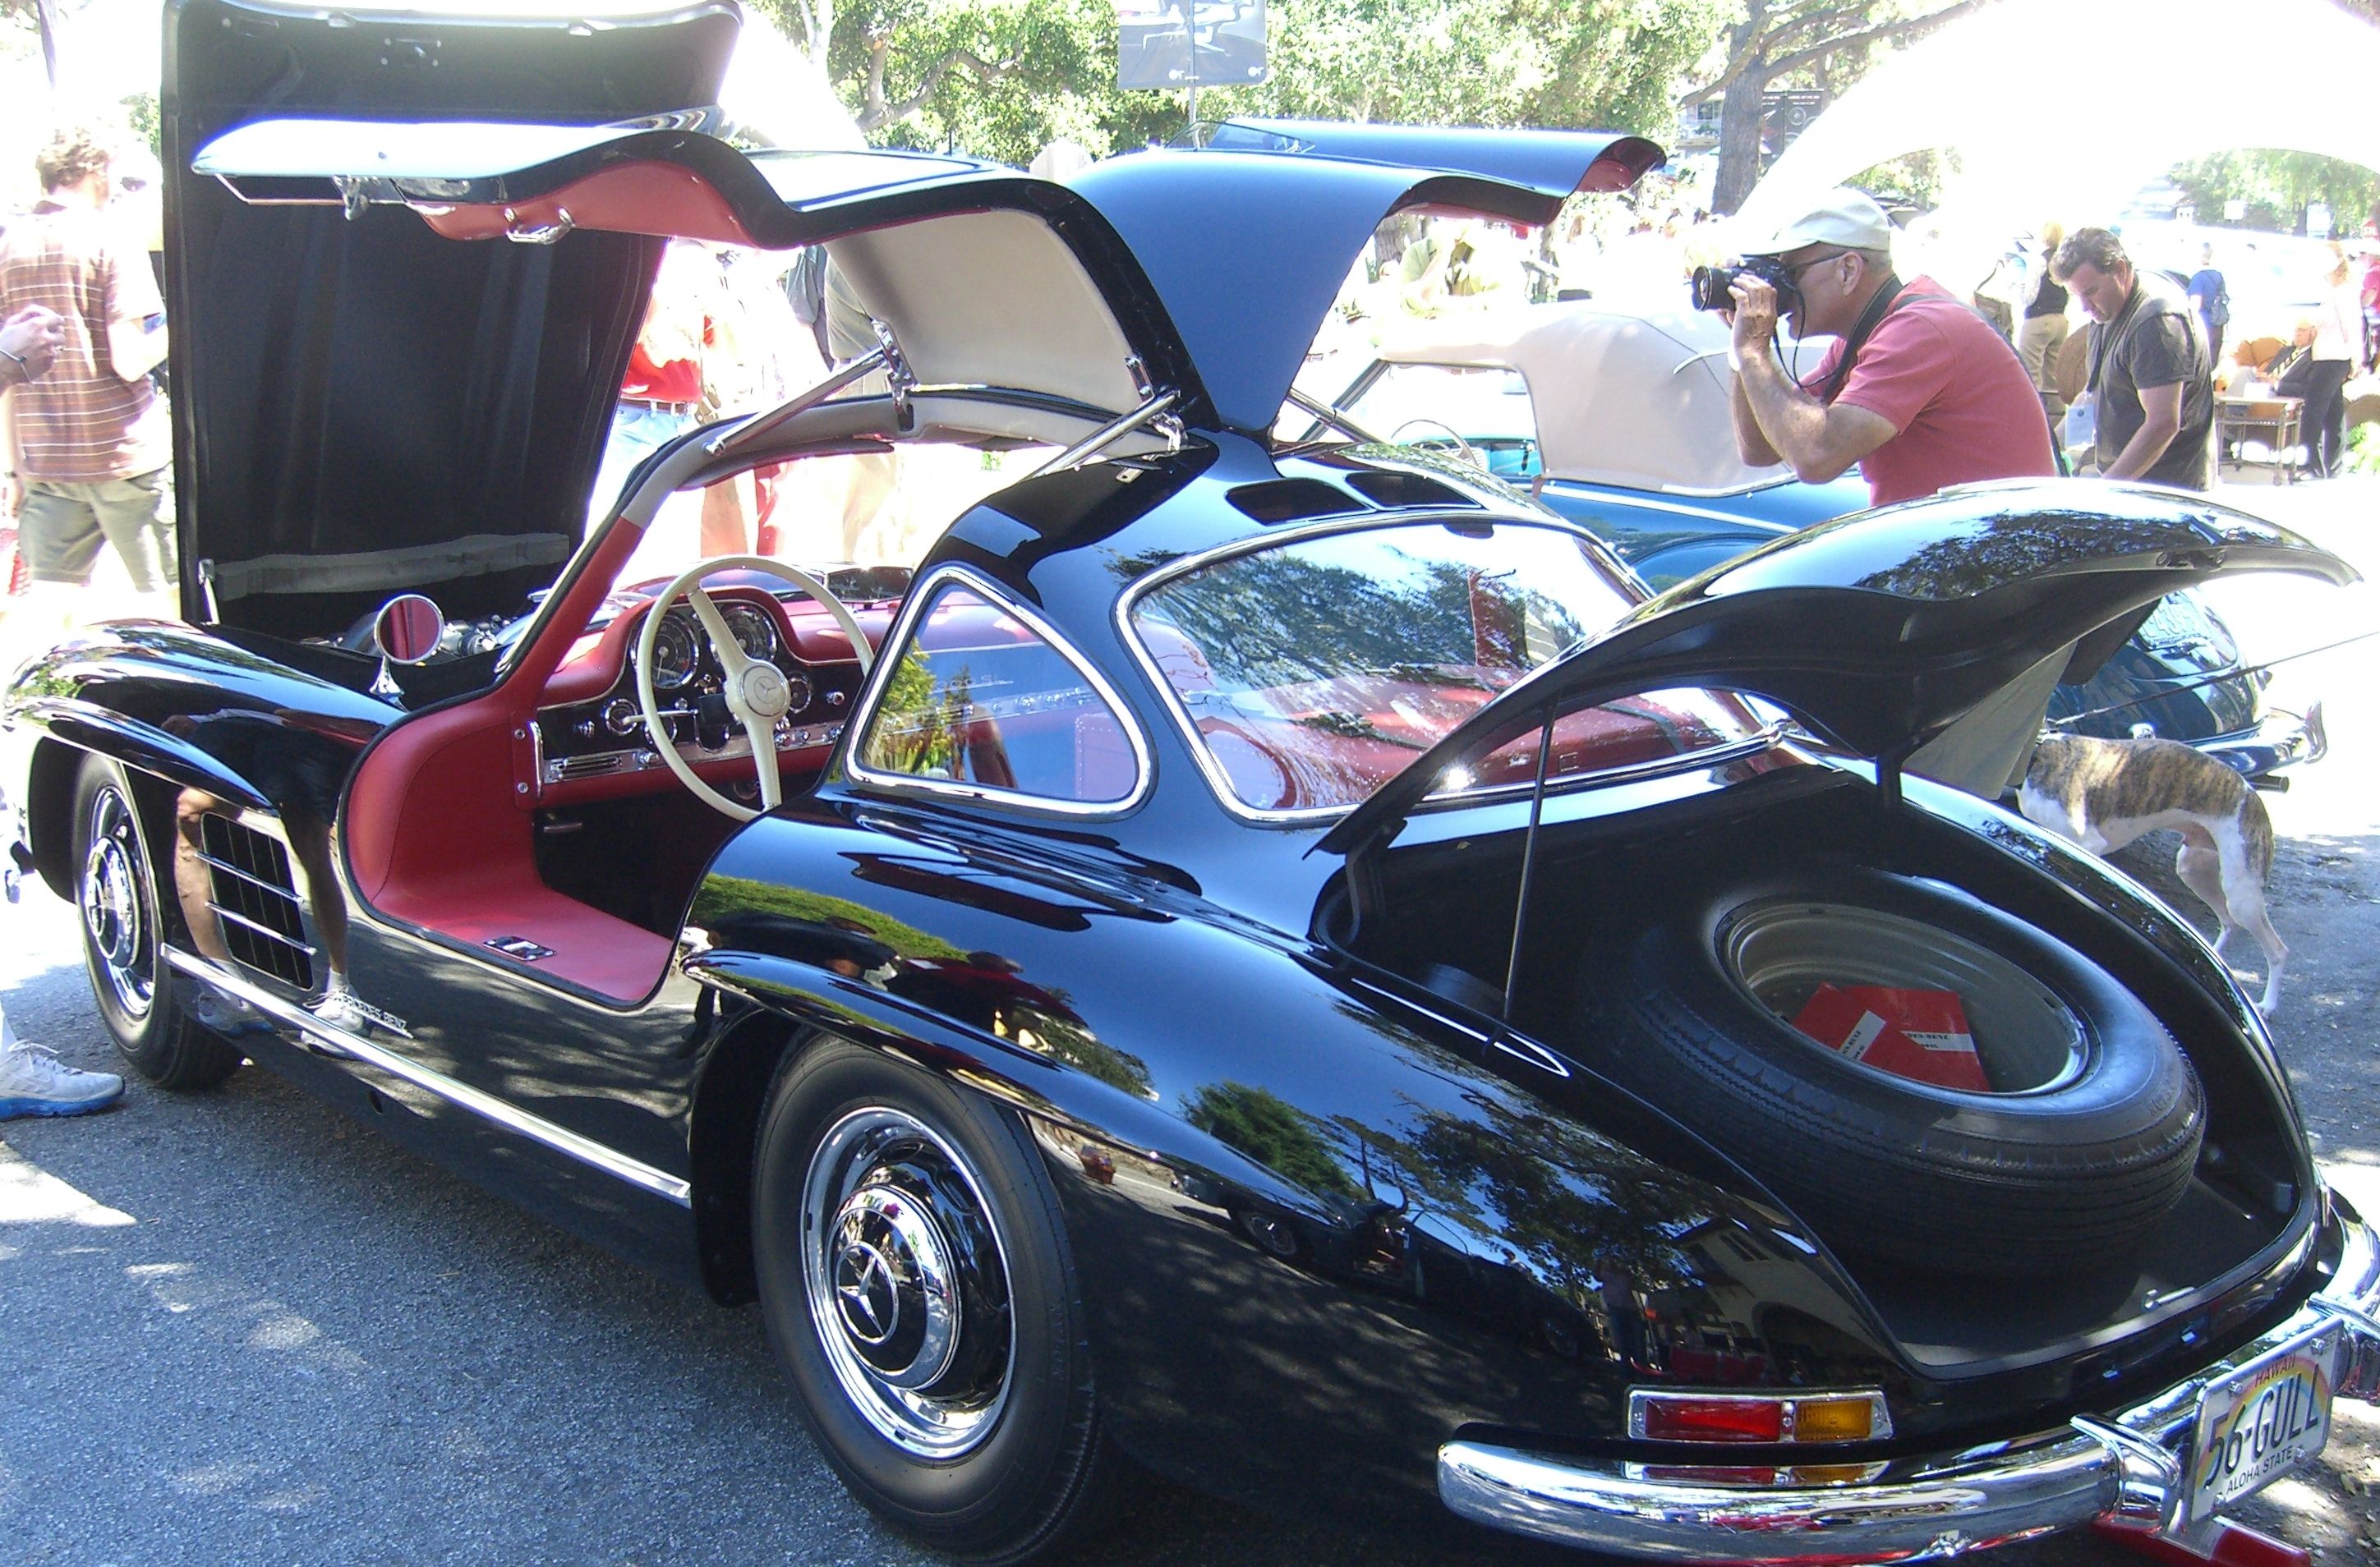 A picture of the 300SL Gullwing opened up.